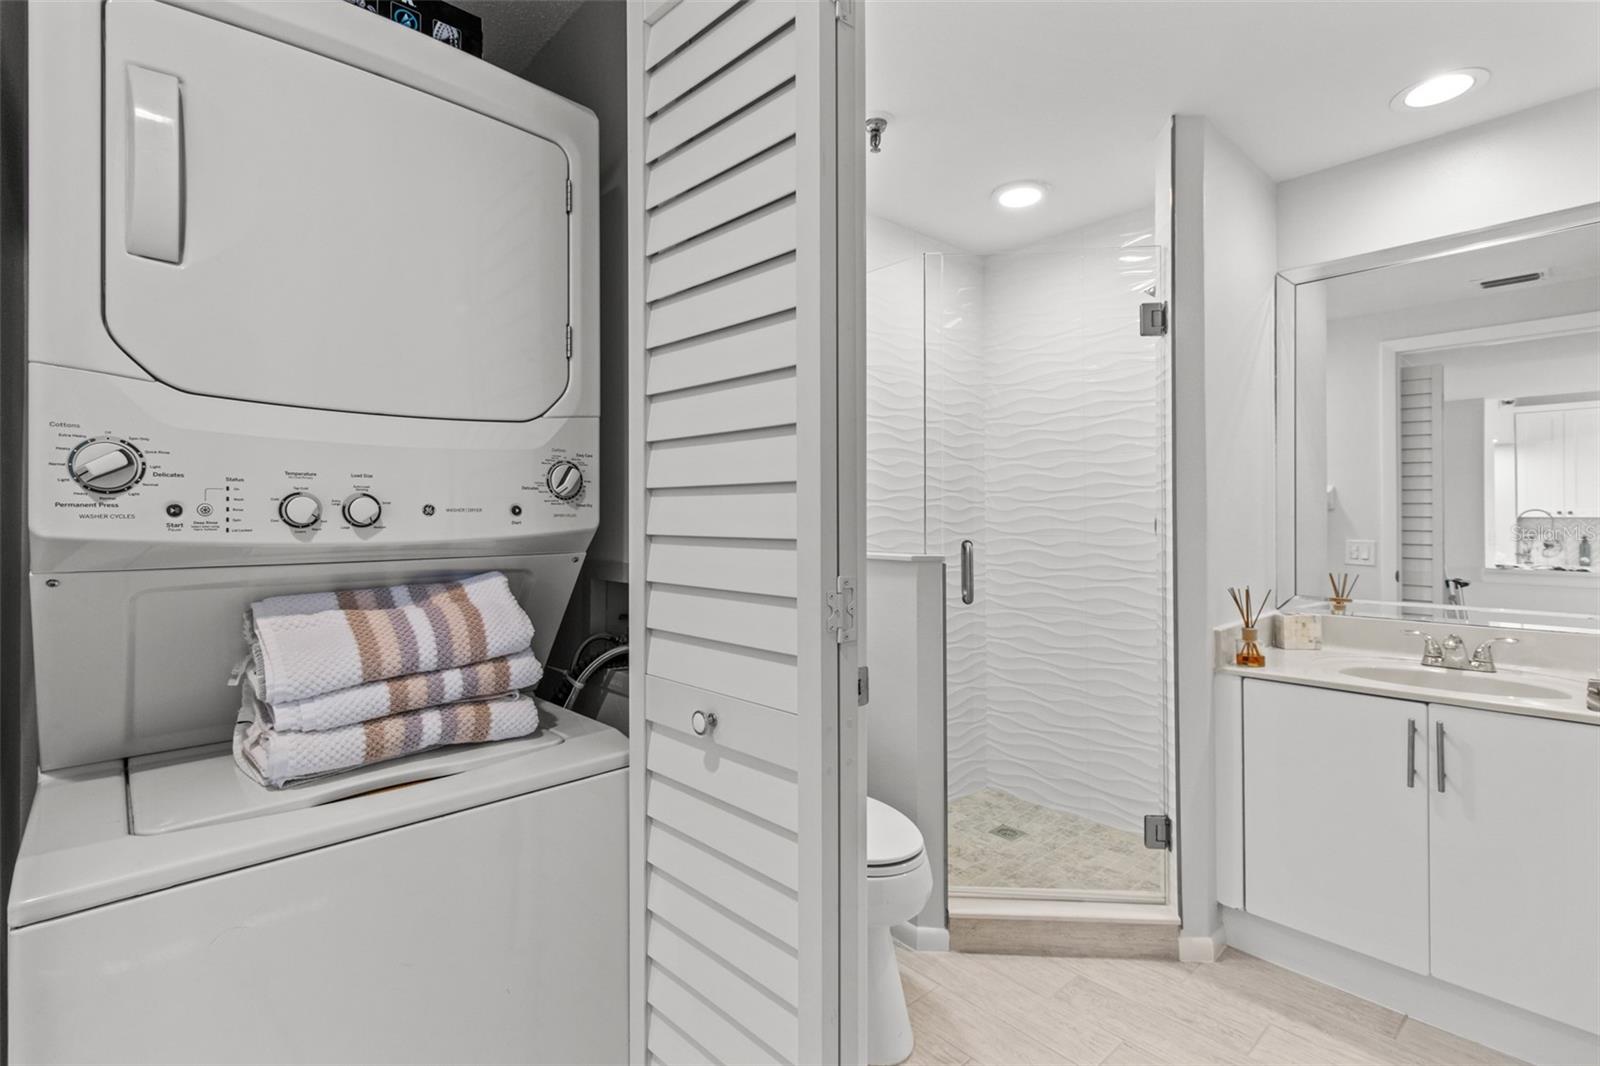 Convenience meets functionality with a full-size washer & dryer tucked neatly into the laundry closet.